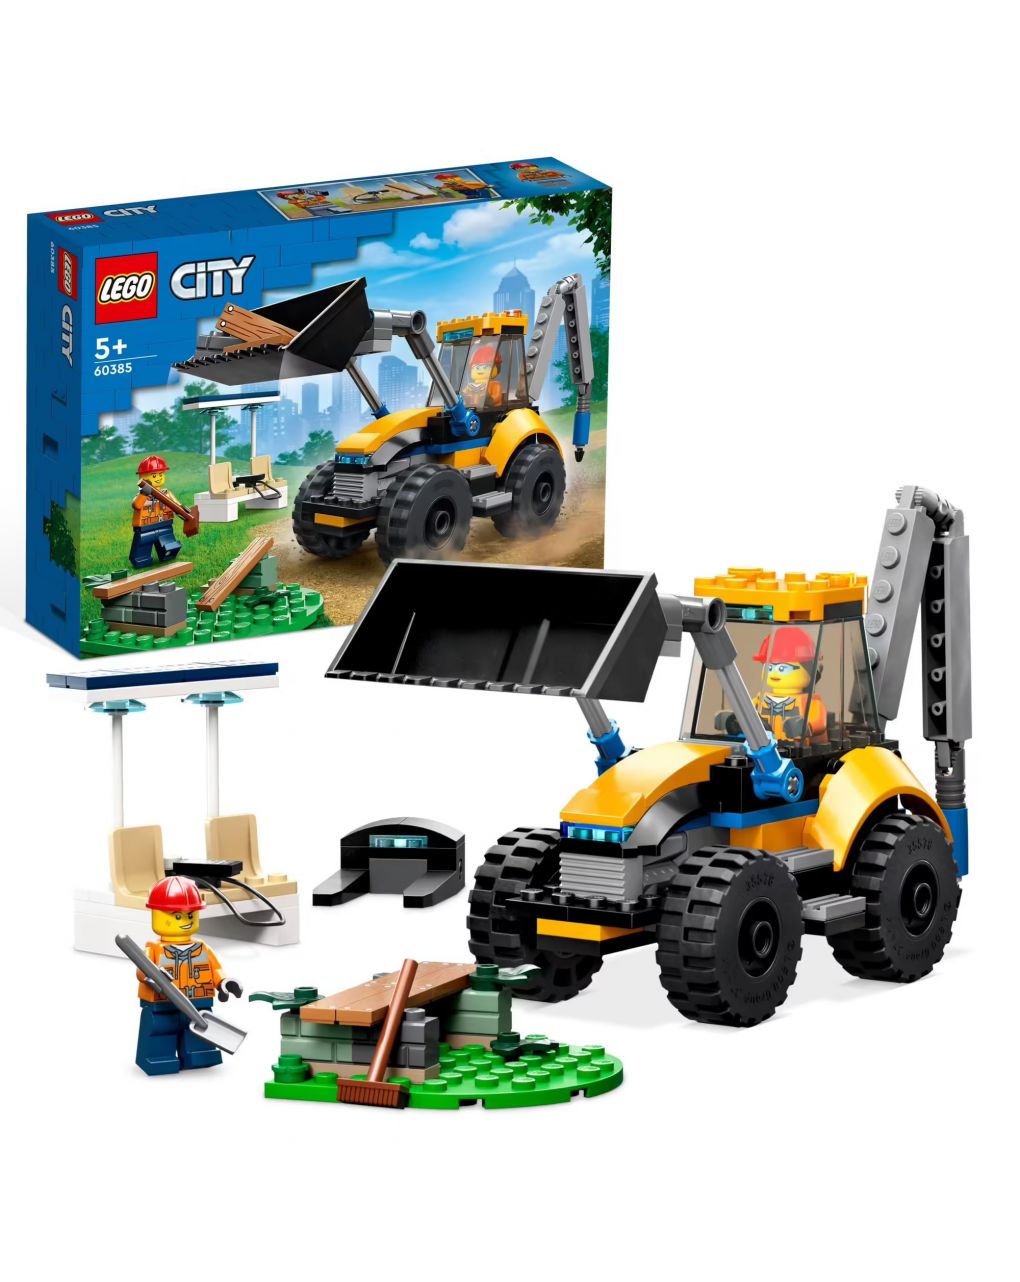 Lego city great vehicles construction digger 60385